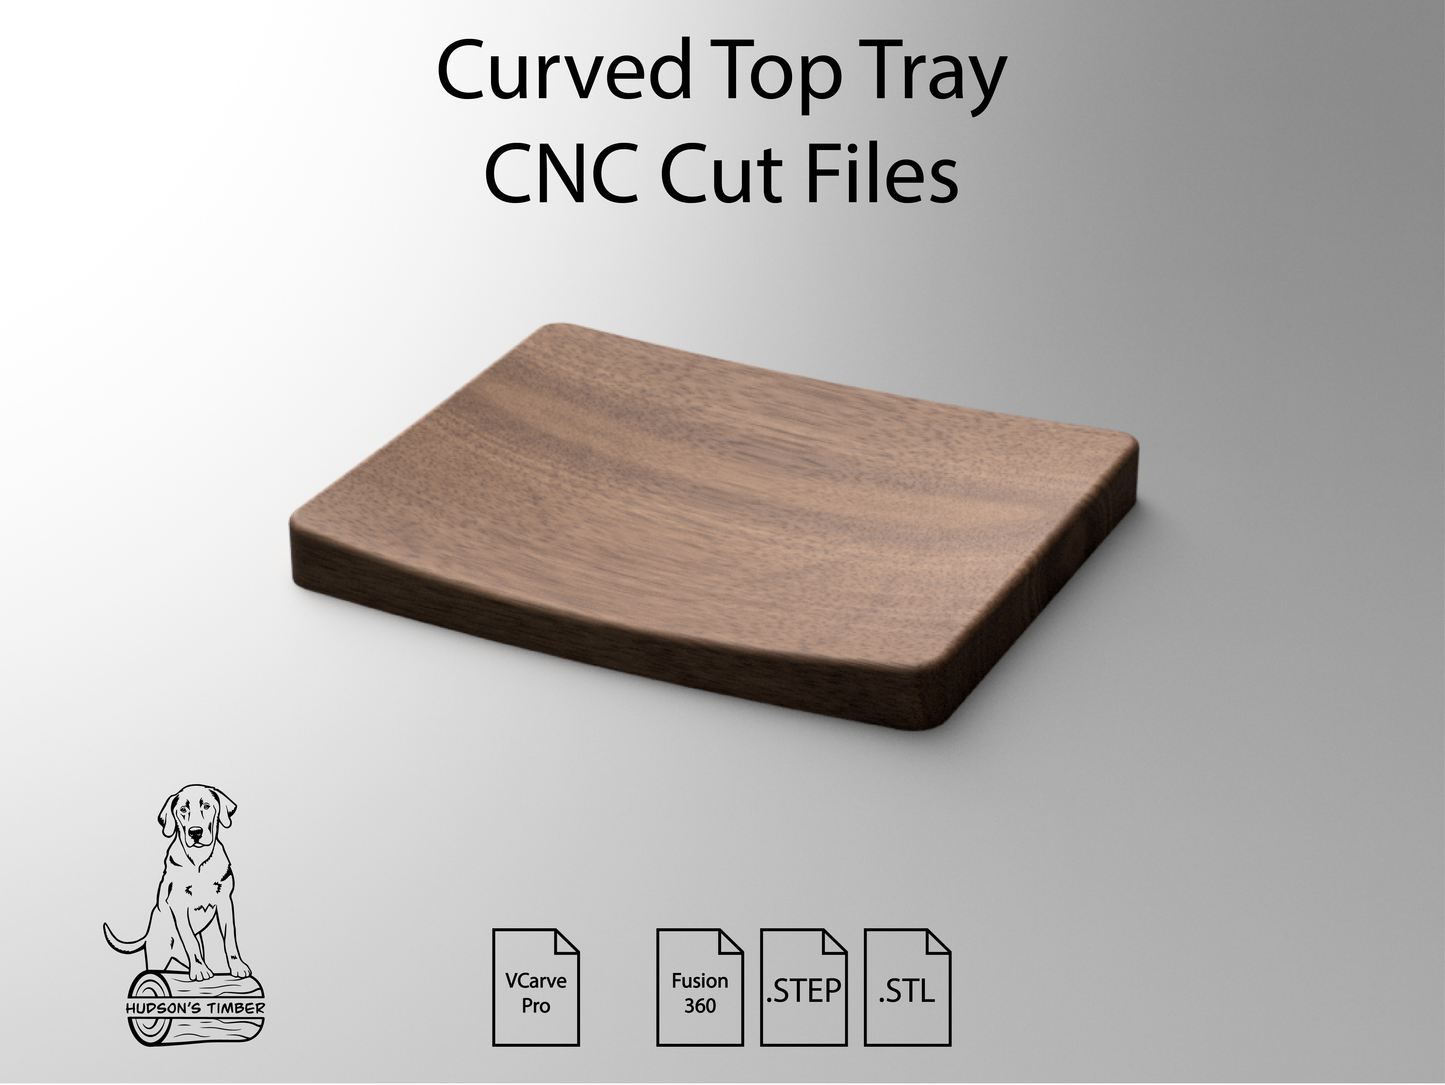 Vcarve Cut File for CNC to make curved top tray